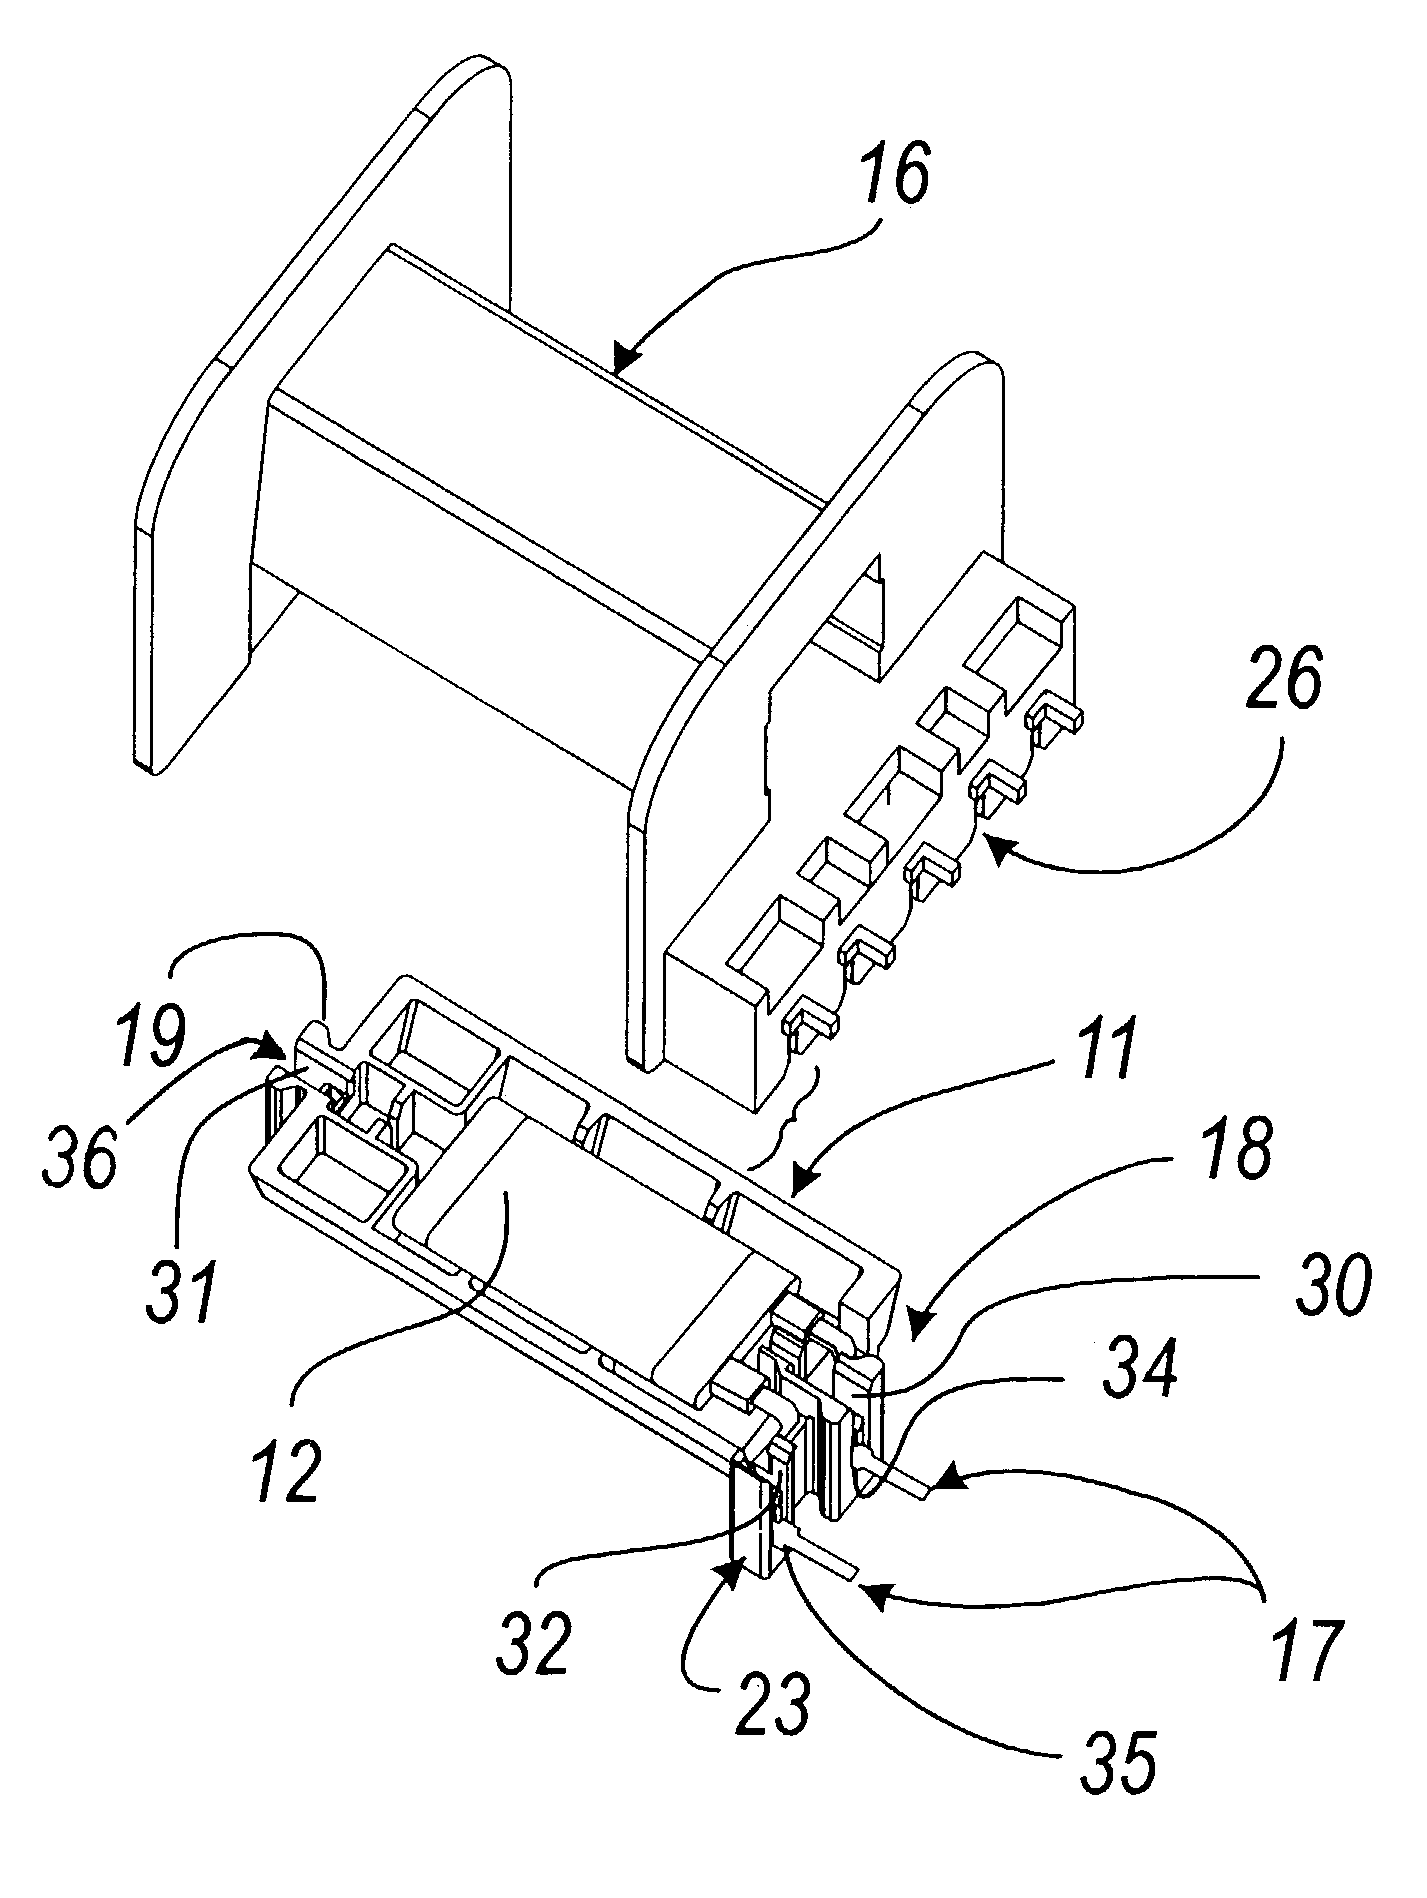 Device for connecting and insulating a thermal protector and/or a fuse for electrical windings of motors